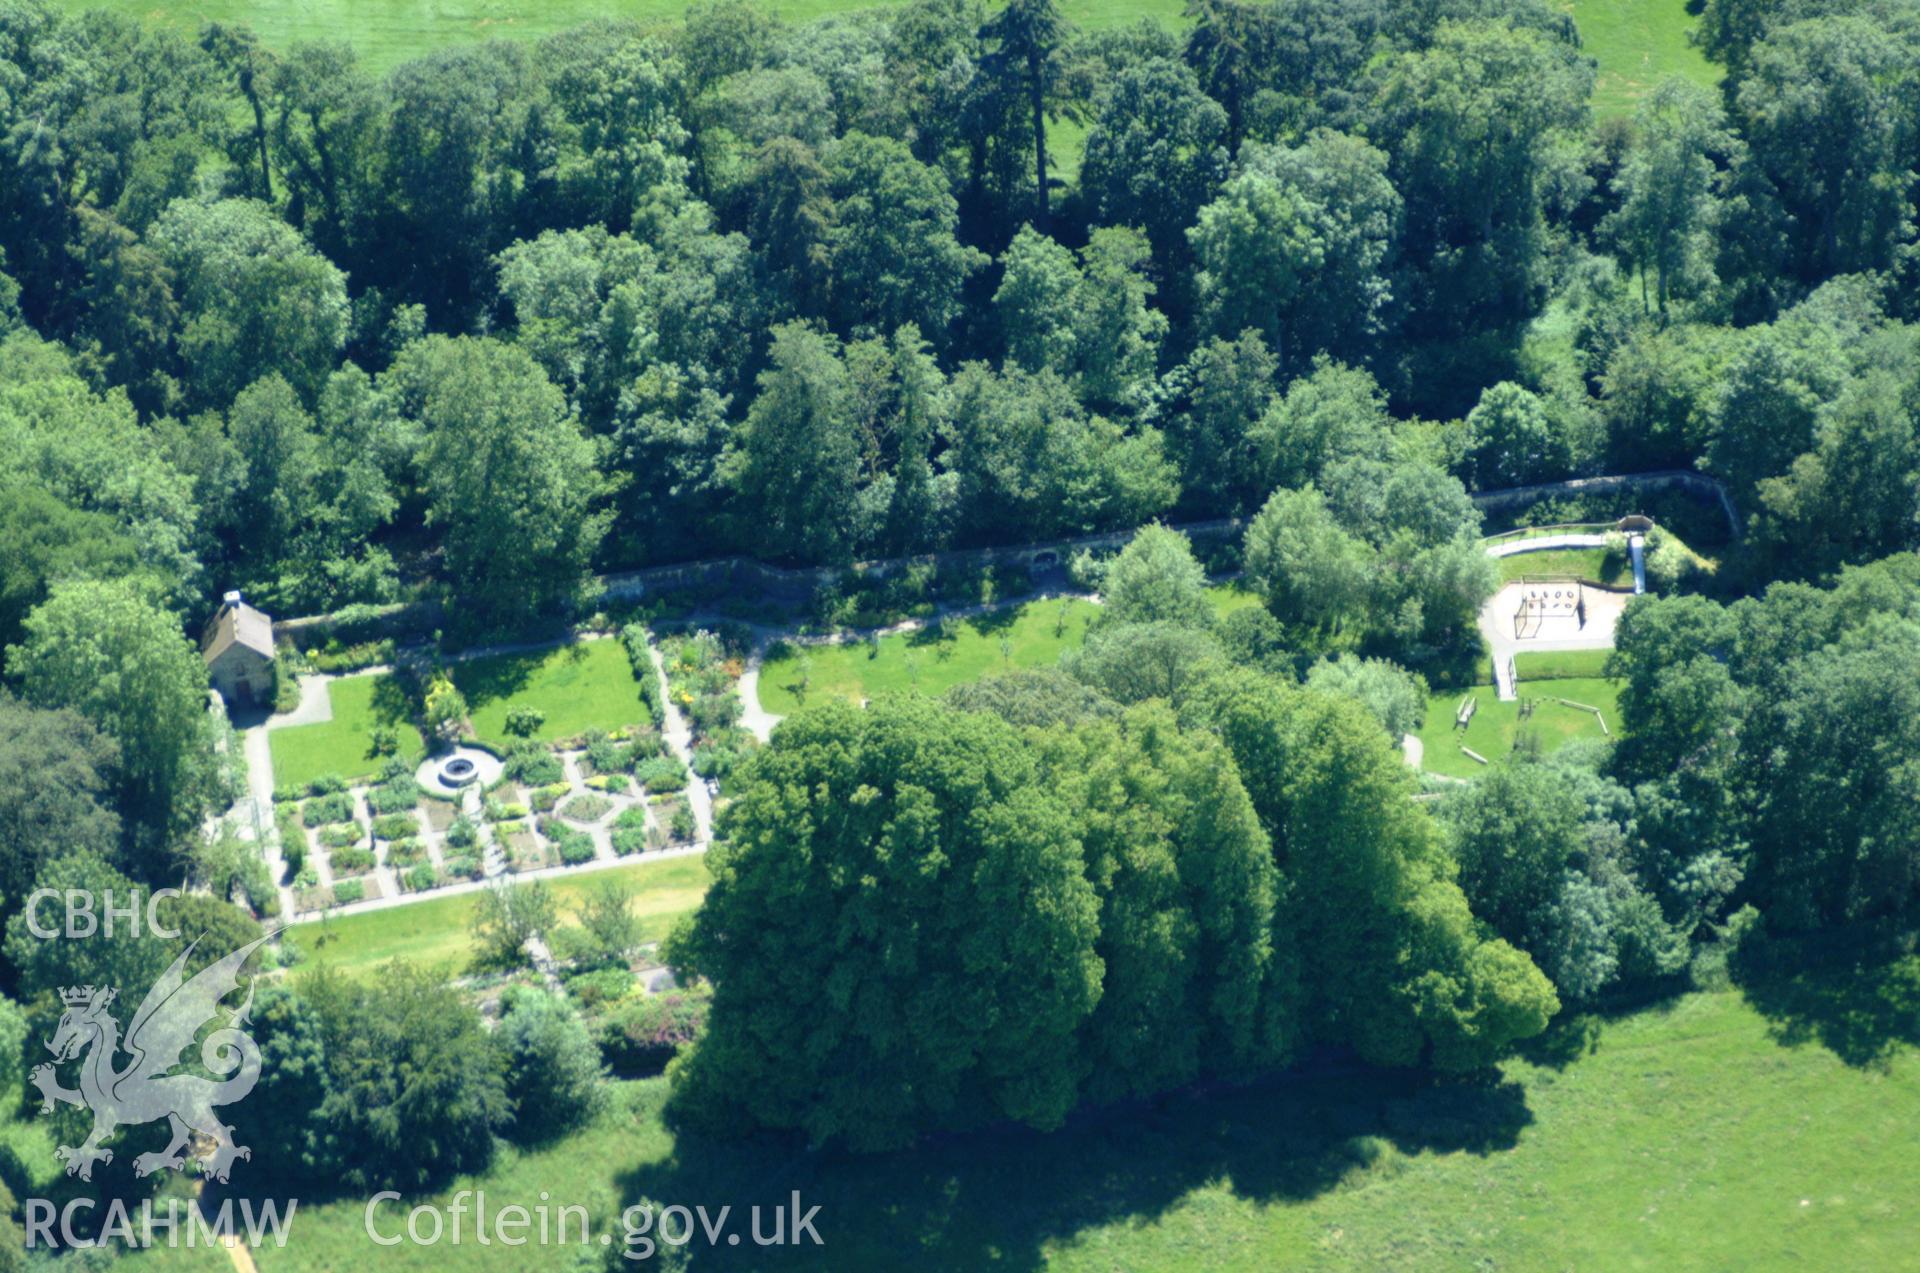 RCAHMW colour oblique aerial photograph of Ty Glyn Garden taken on 14/06/2004 by Toby Driver